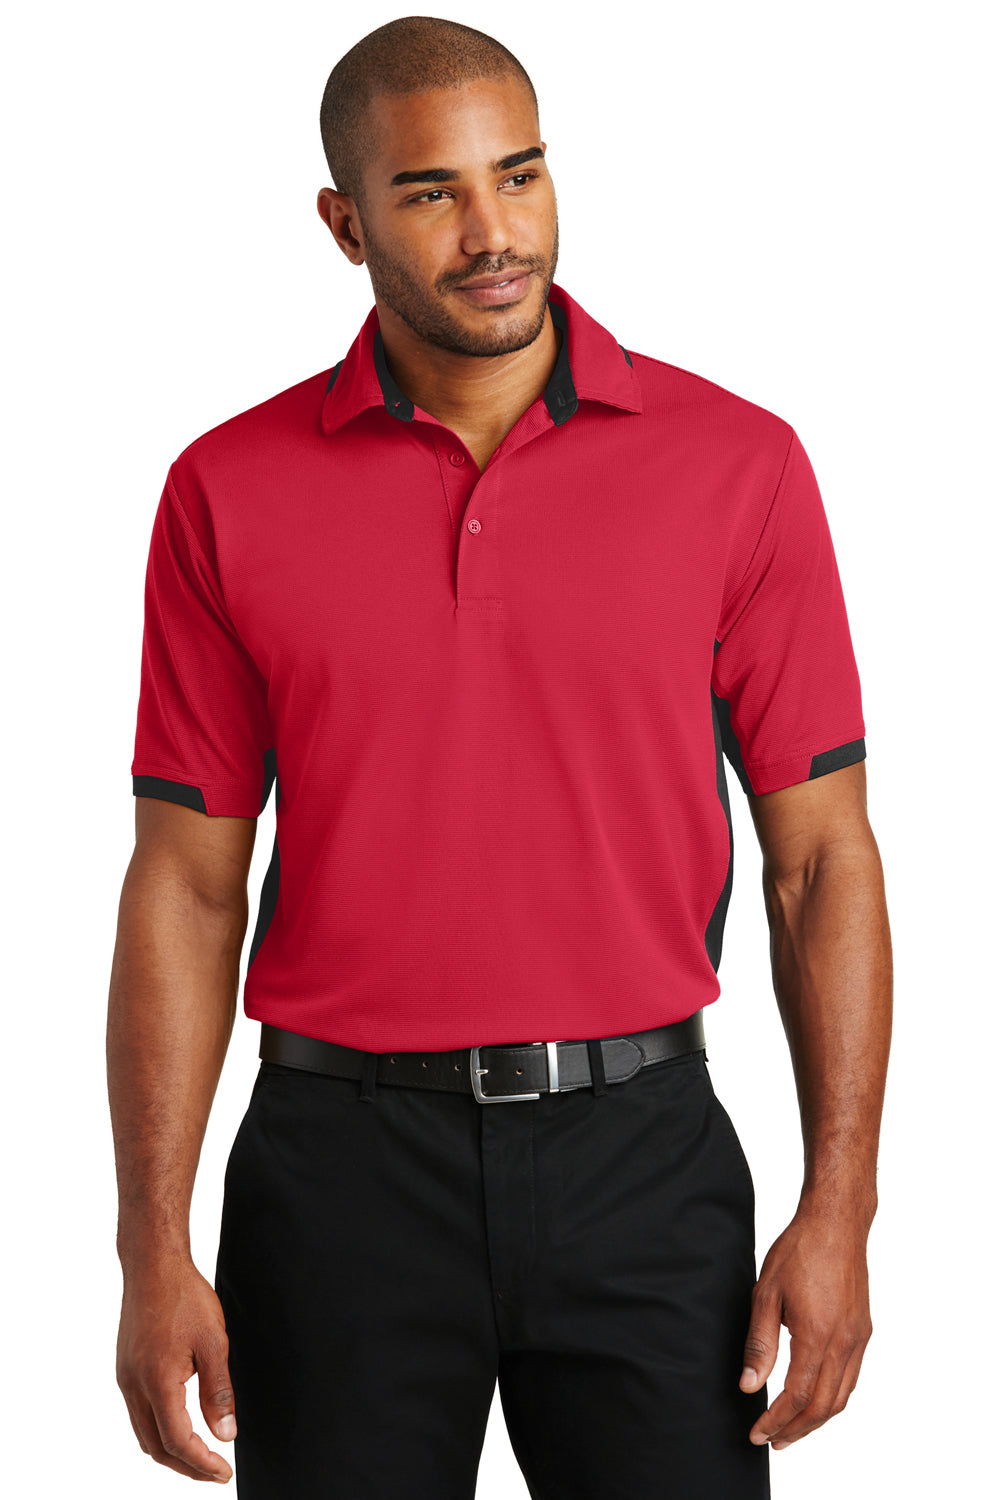 Port Authority K524 Mens Dry Zone Moisture Wicking Short Sleeve Polo Shirt Red/Black Front